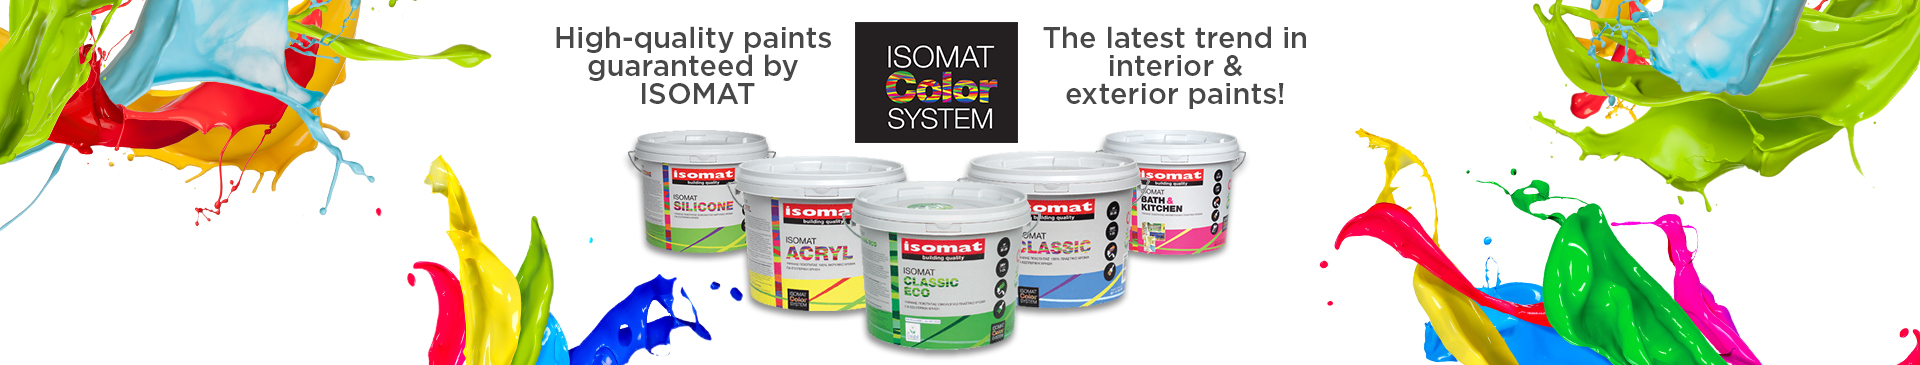 Isomat Color System